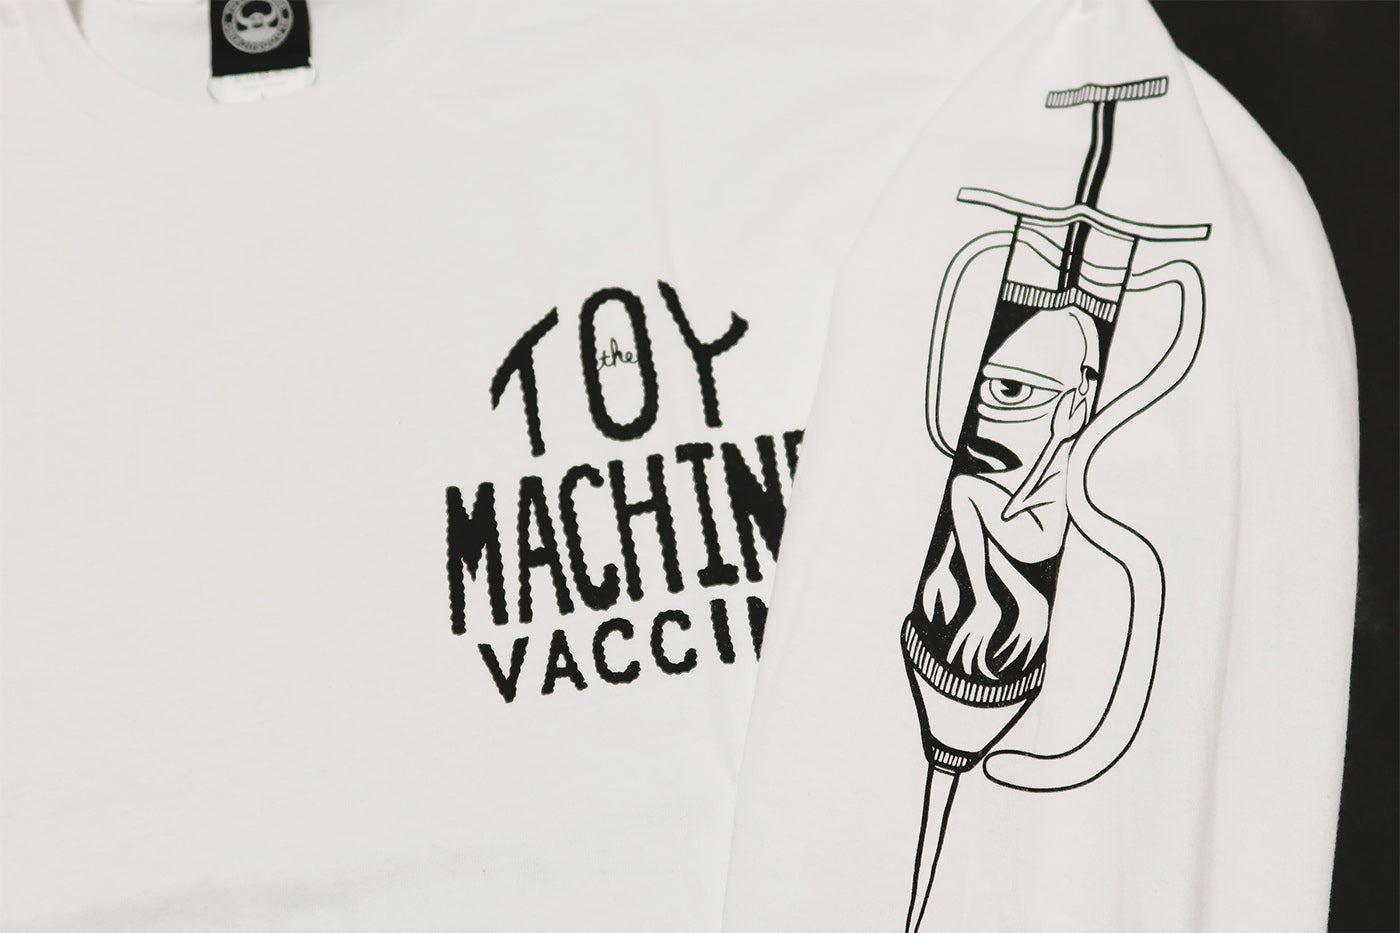 TOY MACHINE Toy Machine Long Sleeve T-shirt VACCINE GET INJECTED Embroidery Print TMPELT5 White